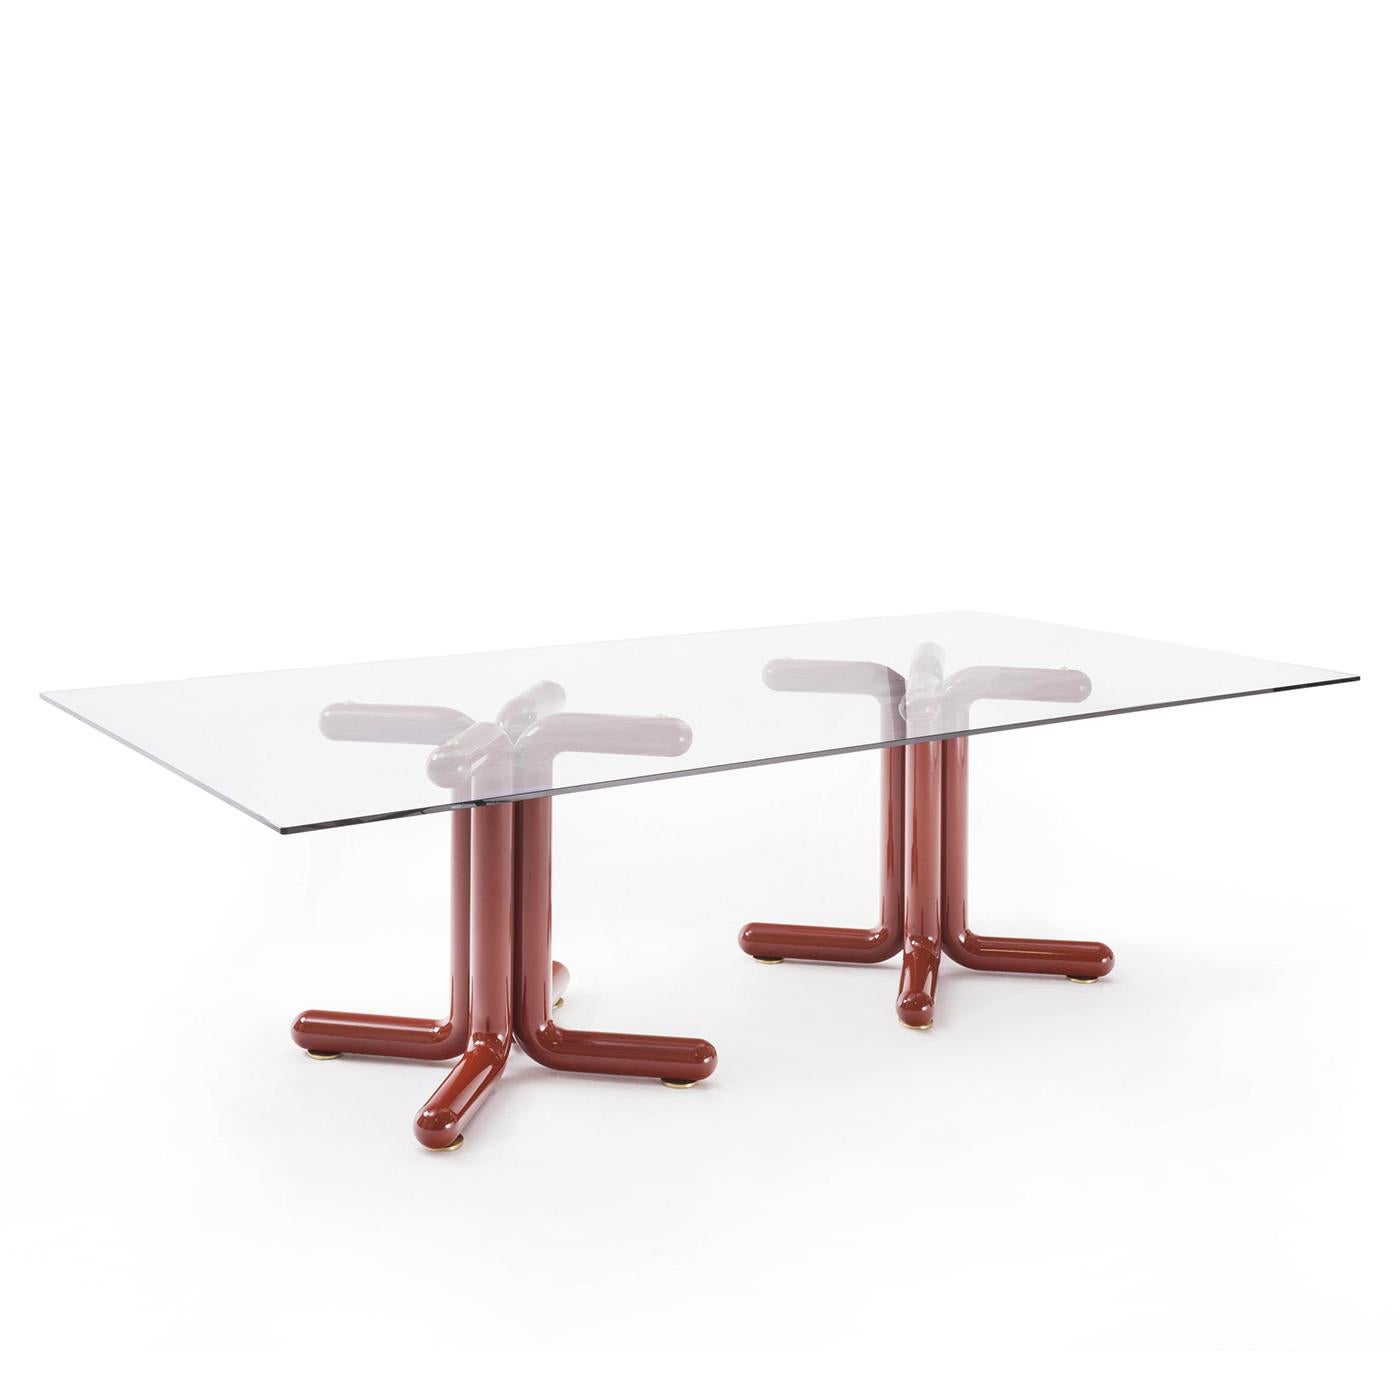 Dining Table Ariana Lacquered with 2 red lacquered wooden base.
and with clear tempered glass top, 12mm thickness. With brushed
brass feet under the base. 
Also available on request with 2 solid ash wood base in coffee stained finish.